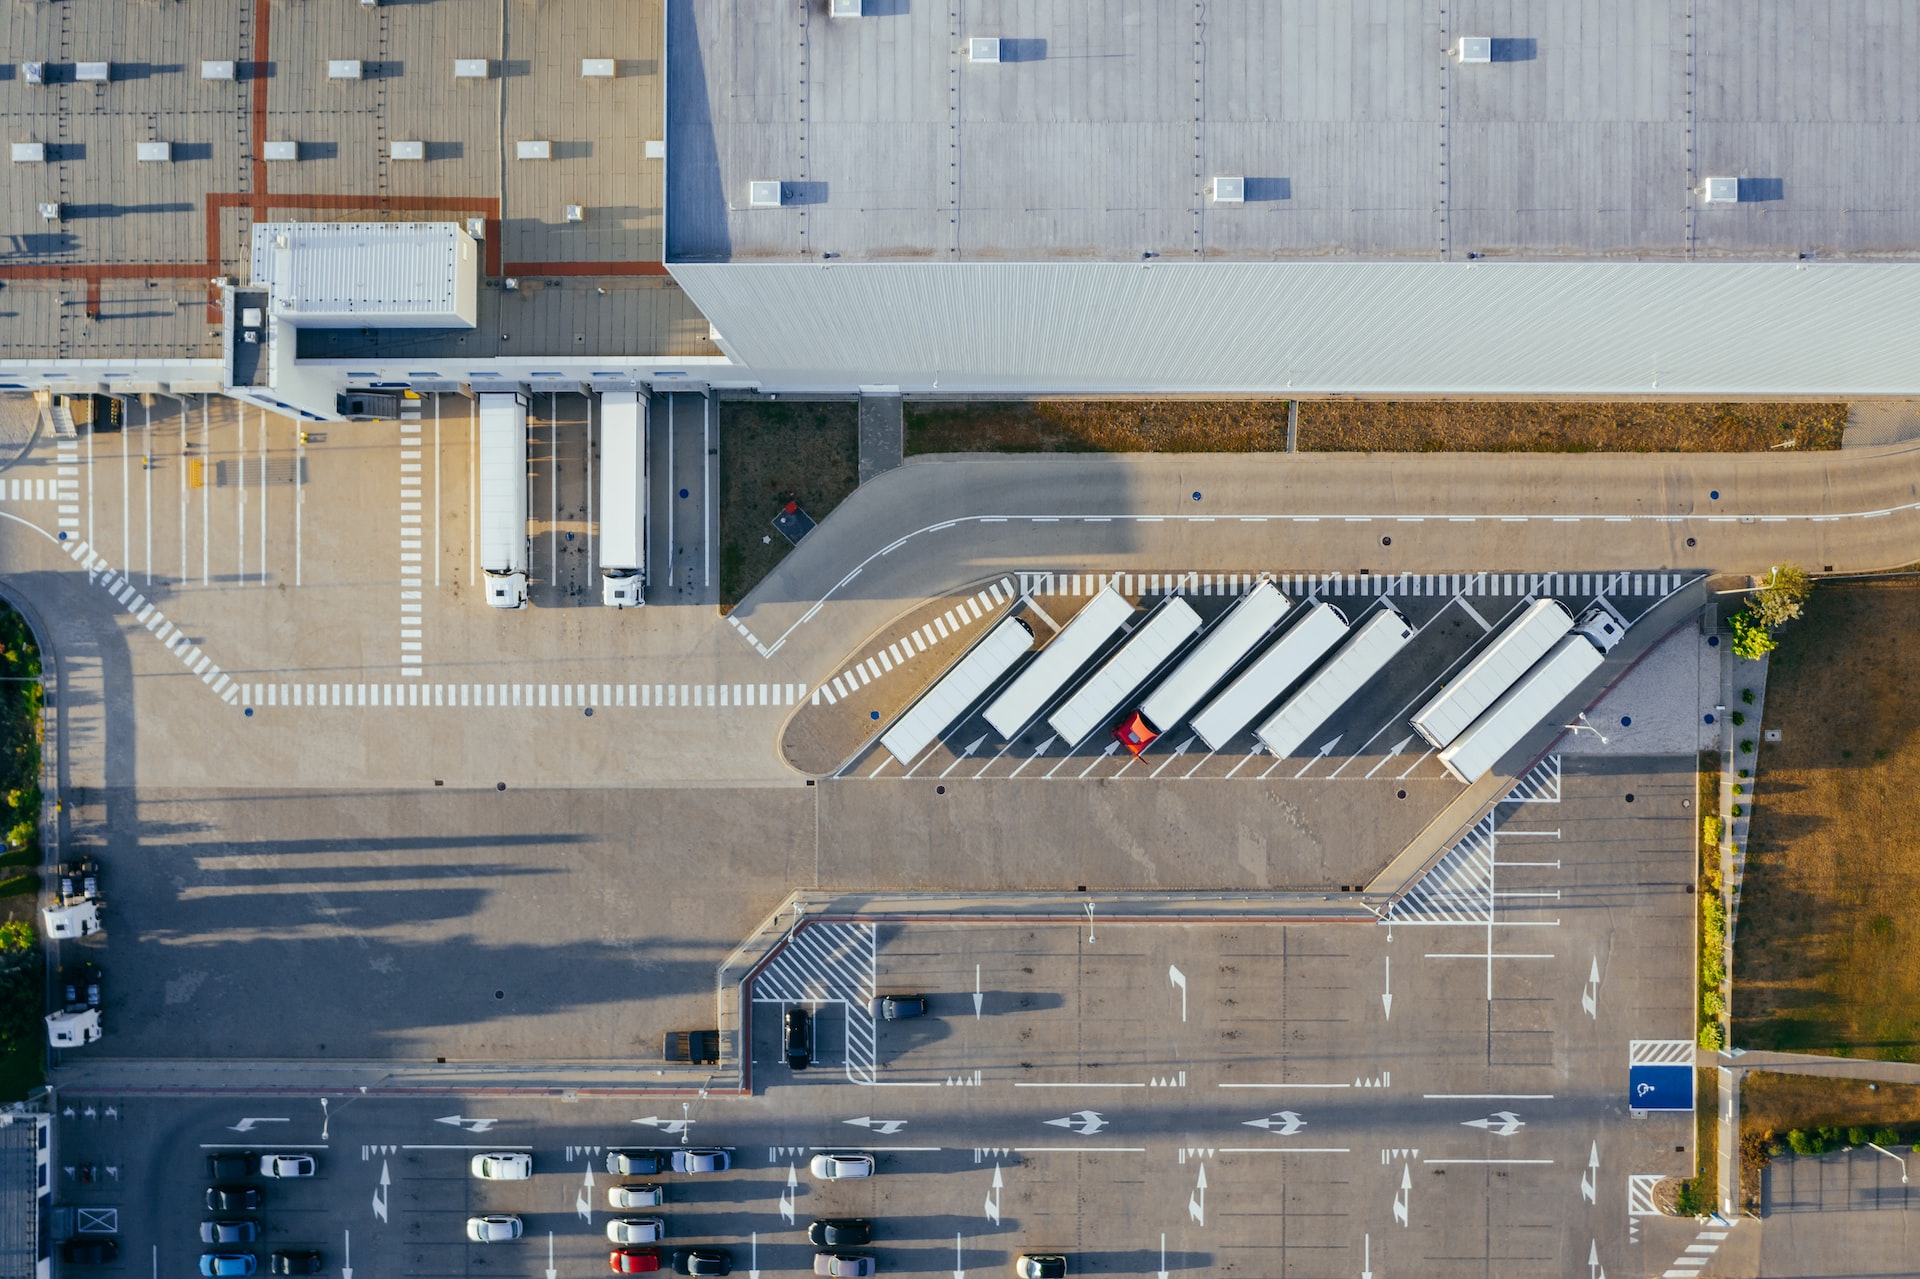 Overhead view of commercial warehouse with lorries parked up